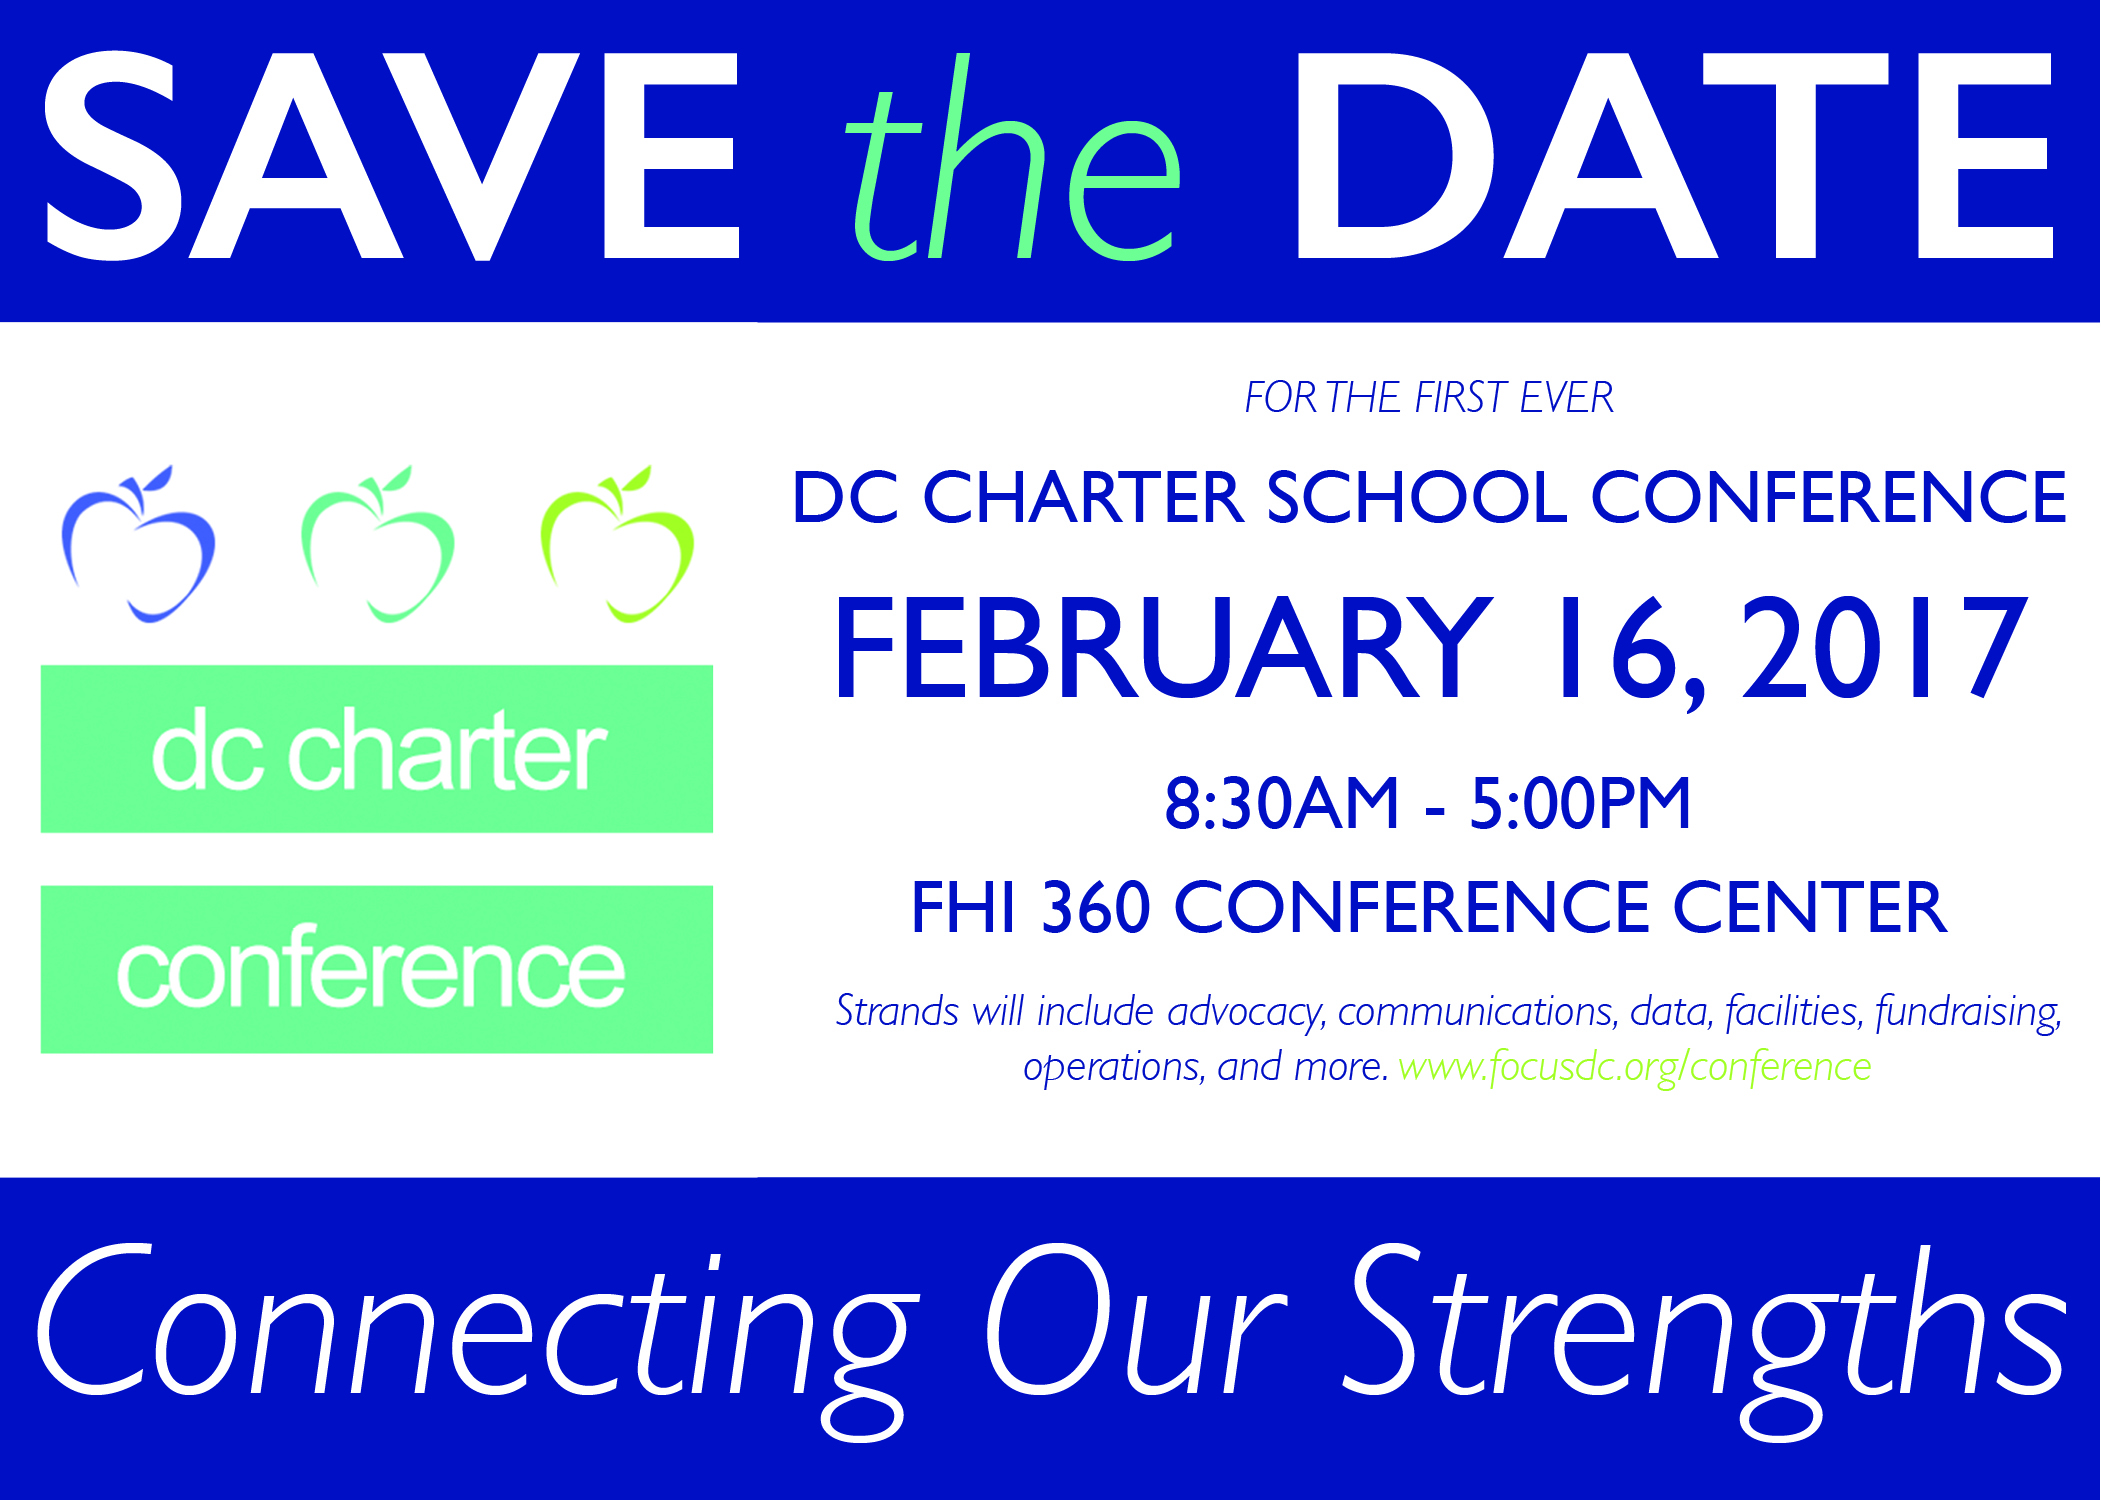 Save the date for the first ever DC Charter School Conference  Thursday, February 16, 2017, 8:30 am - 5:00 pm  Strands will include advocacy, communications, data, facilities, fundraising, operations, and more.  Please visit www.focusdc.org/conference for more information